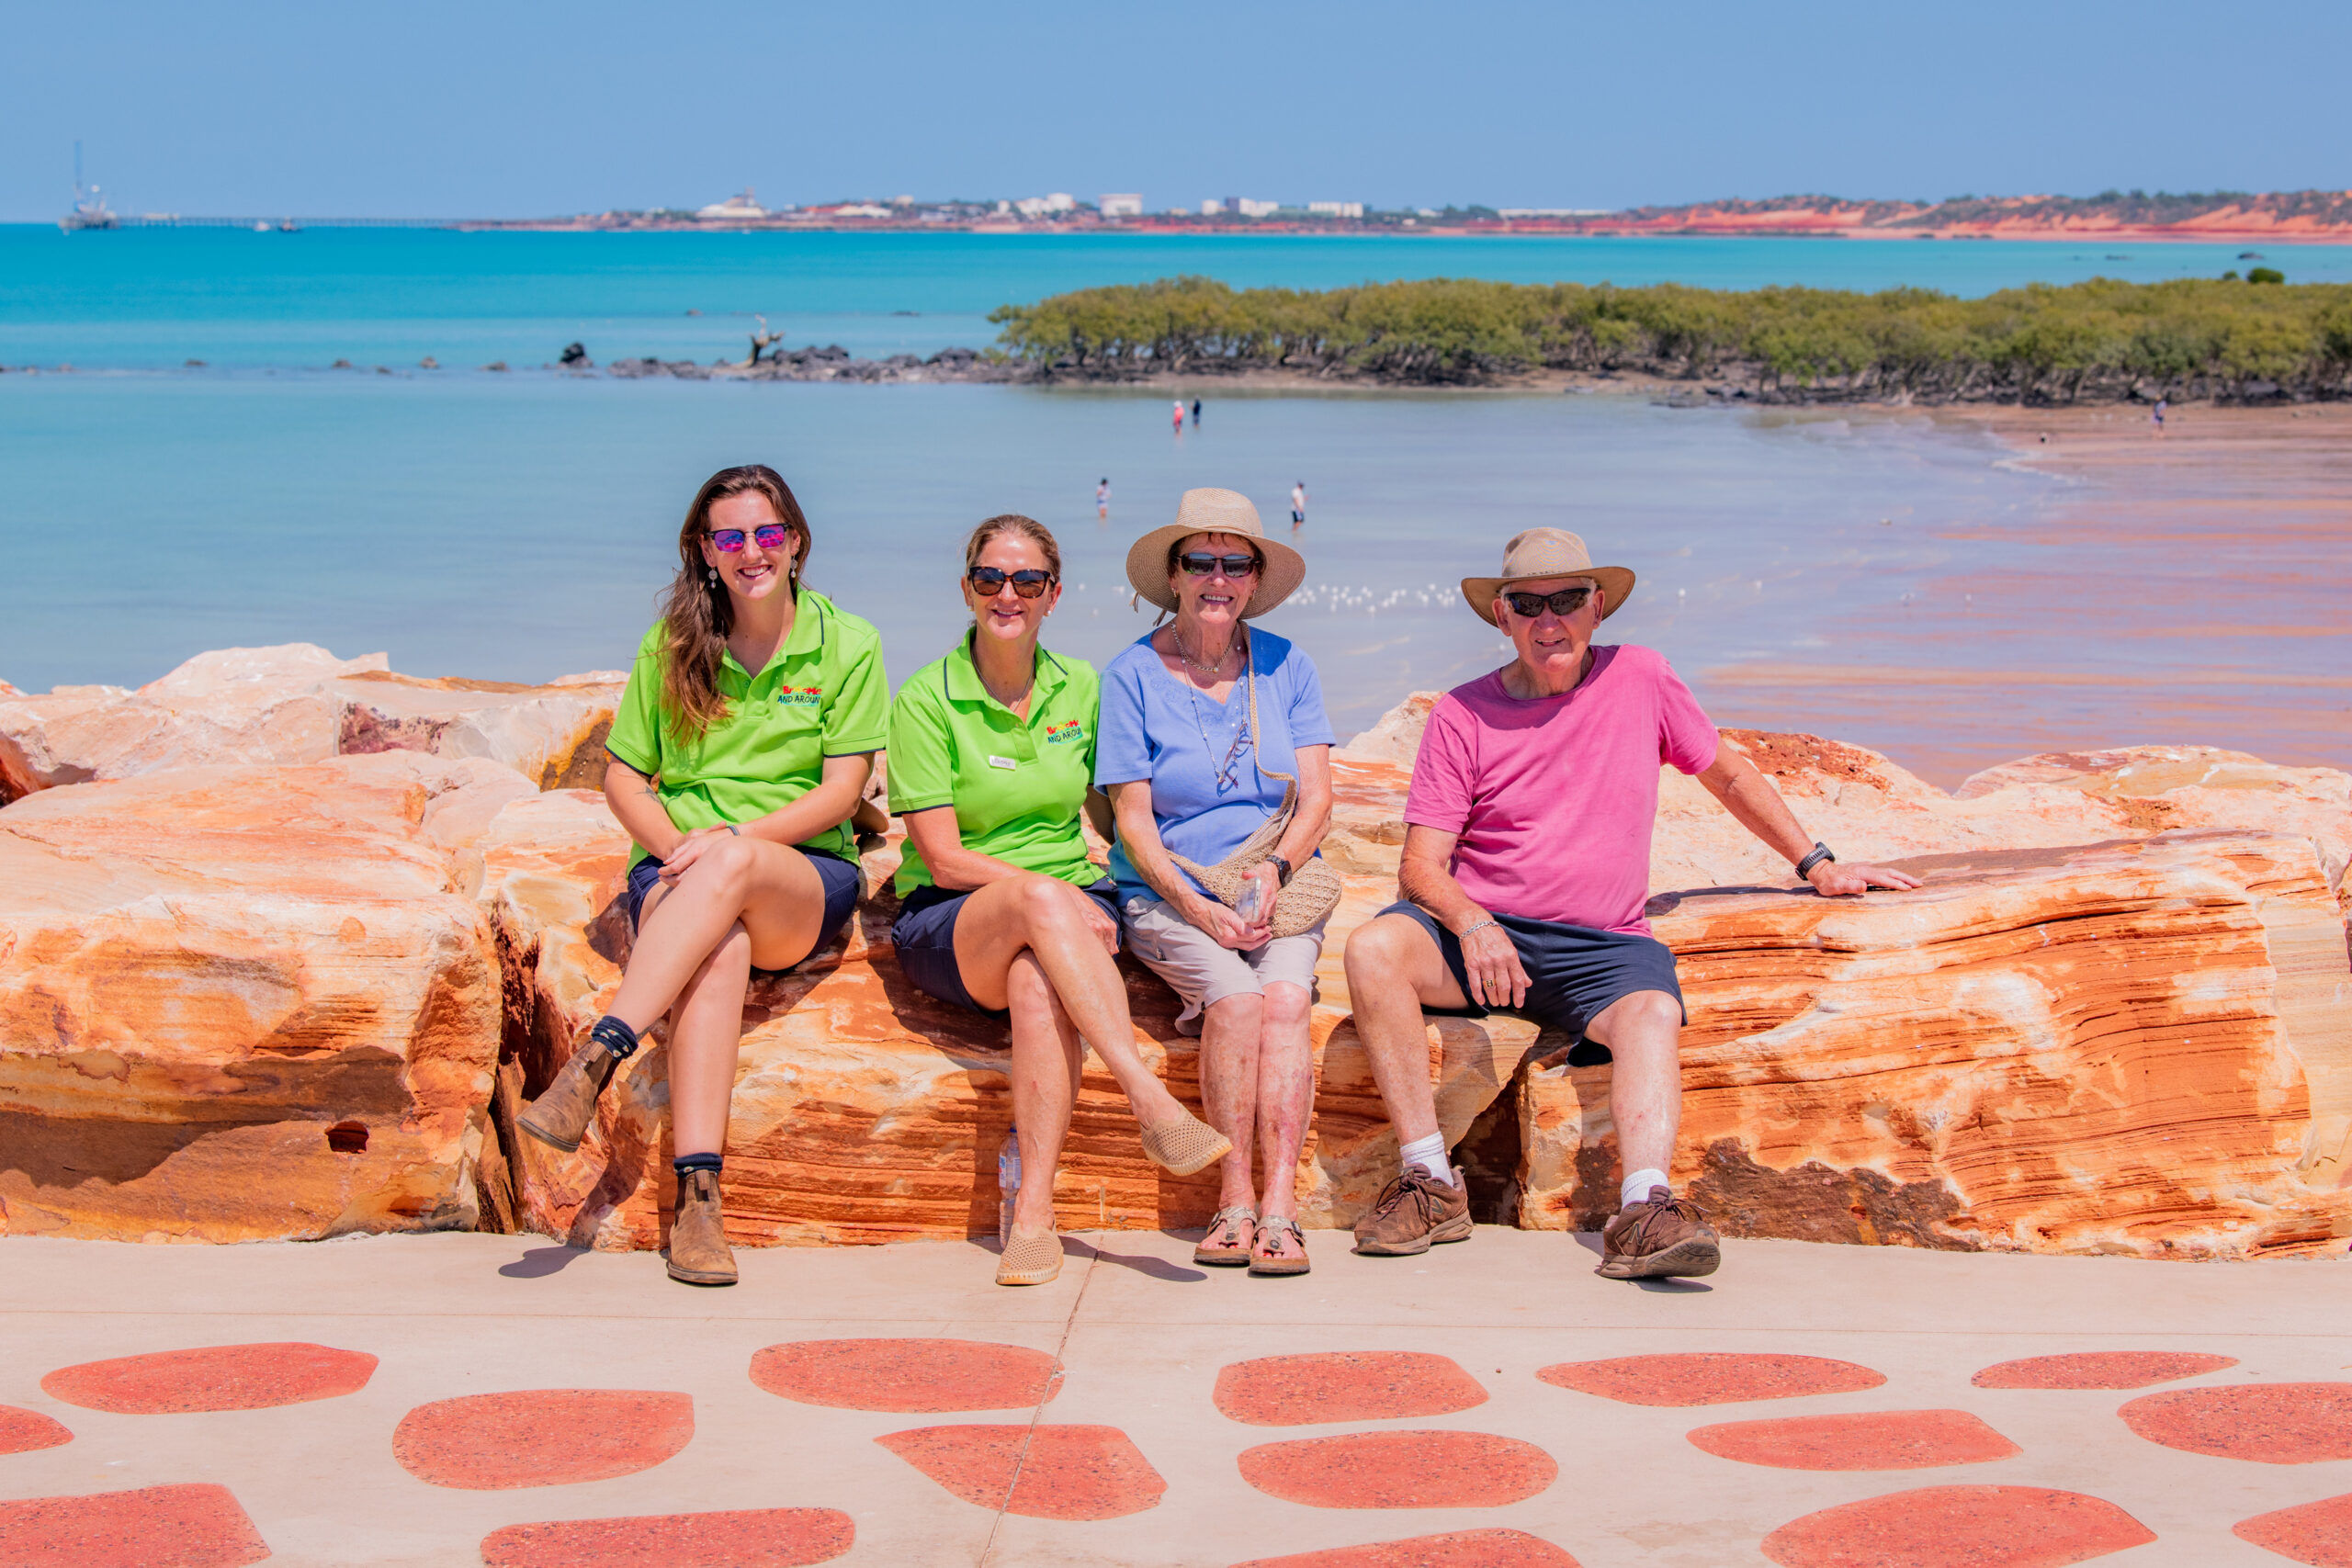 Broome Panoramic Town Tour - Discover Broome in a Day -Best of Broome sights, culture and history (Morning Tour)